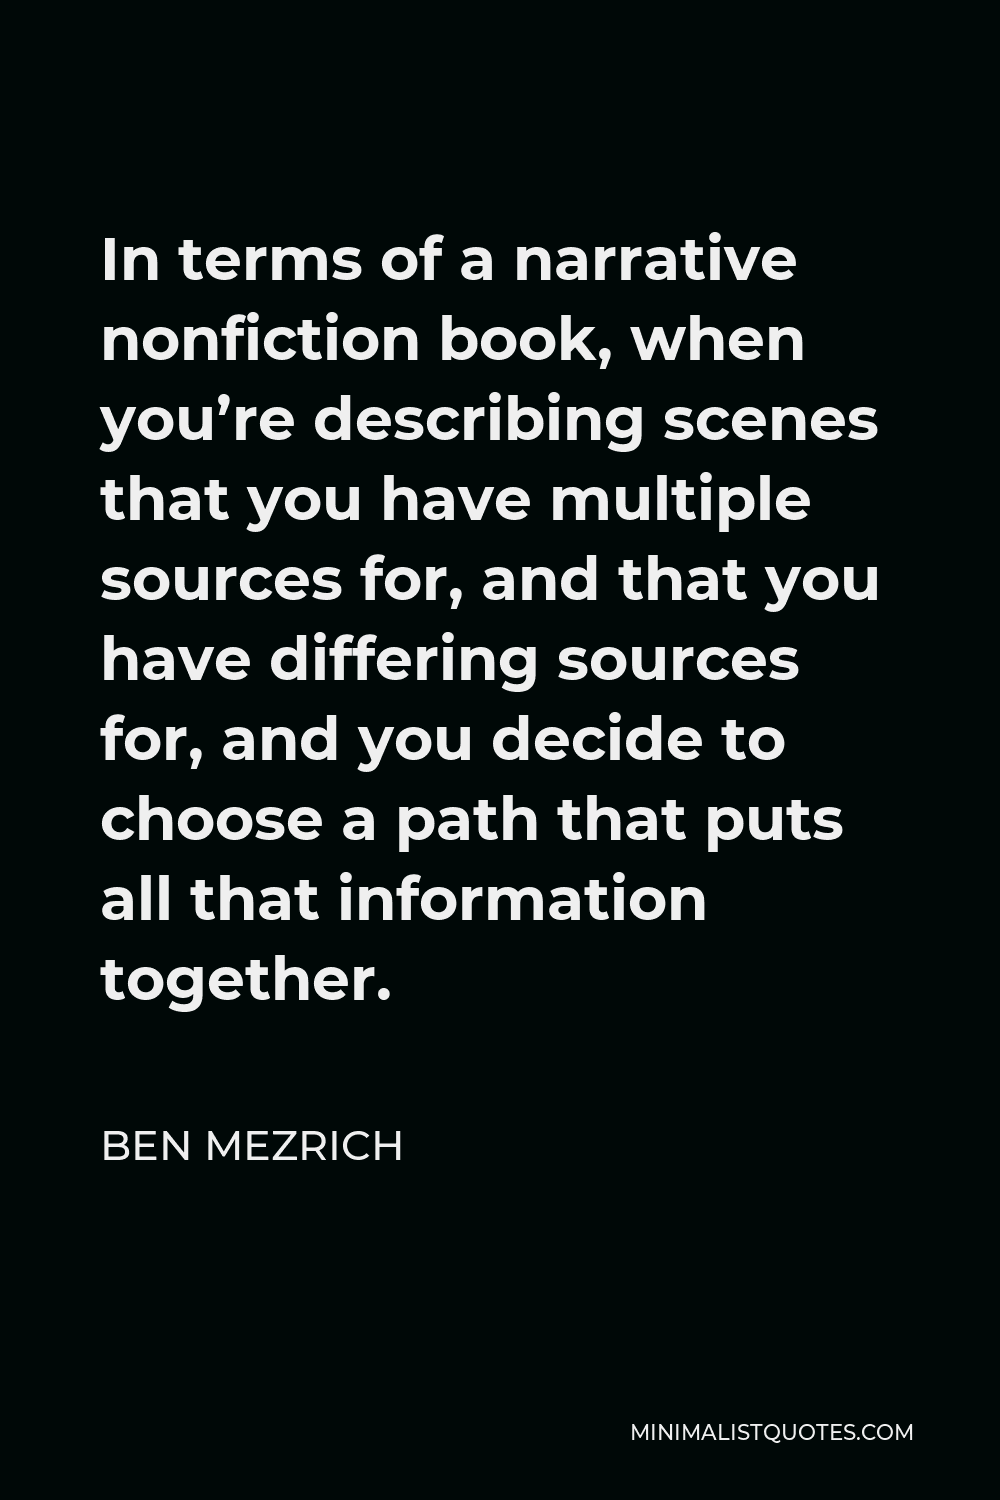 Ben Mezrich Quote - In terms of a narrative nonfiction book, when you’re describing scenes that you have multiple sources for, and that you have differing sources for, and you decide to choose a path that puts all that information together.